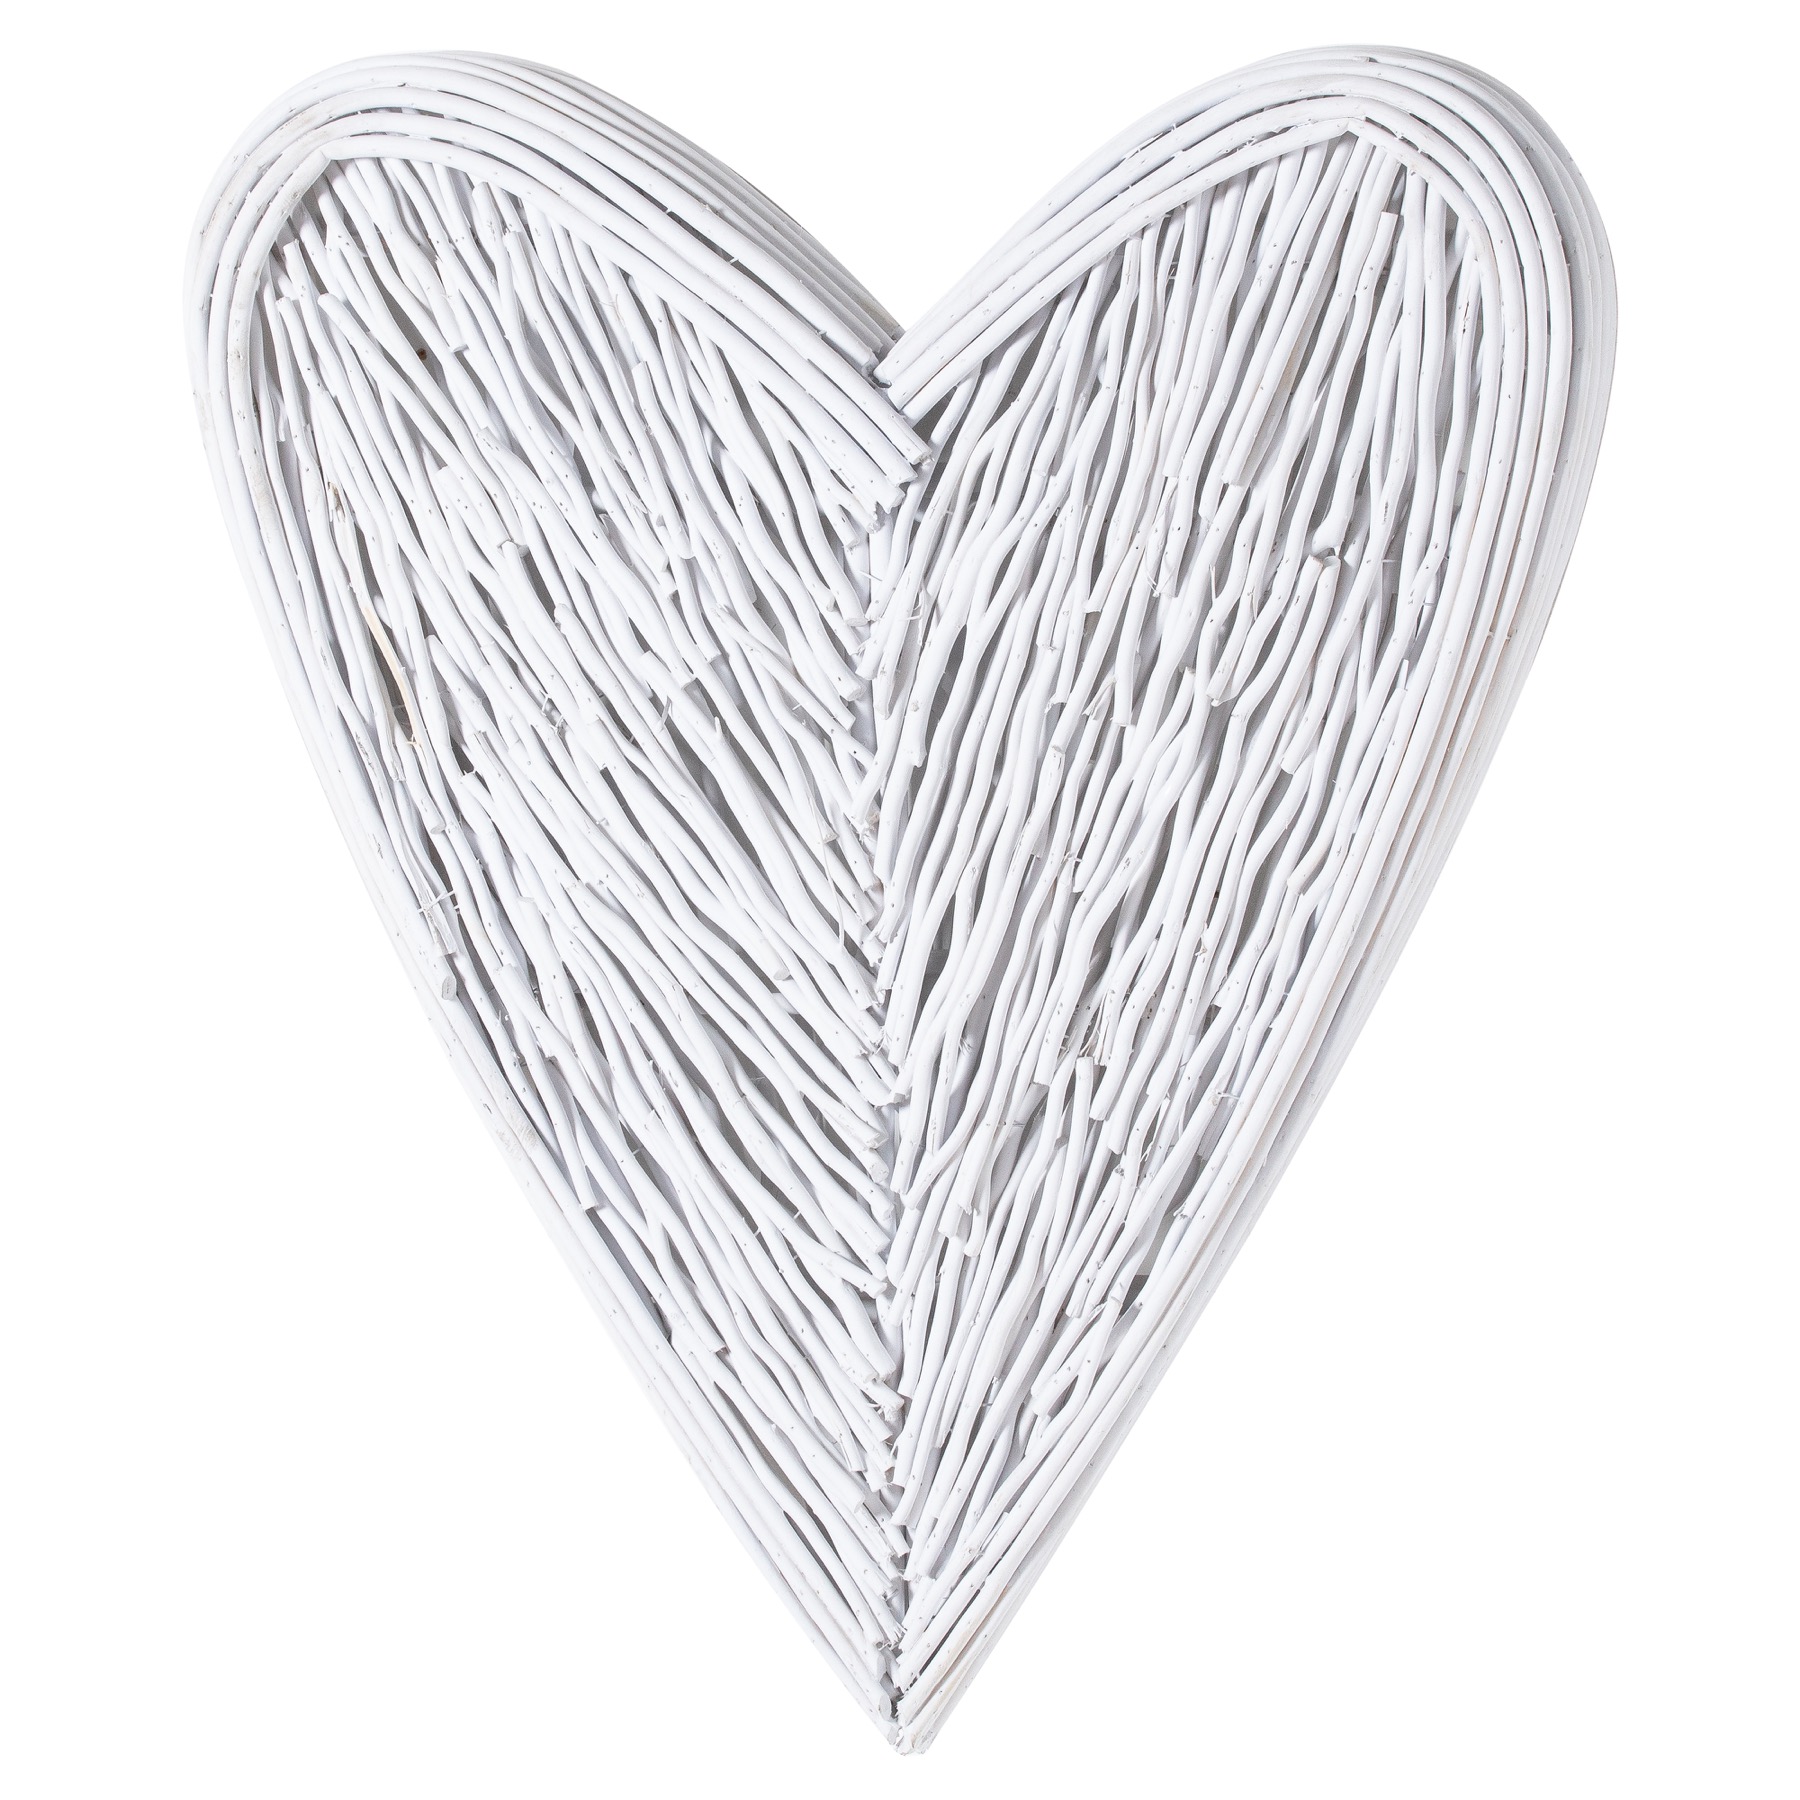 White Willow Branch Heart - Image 1